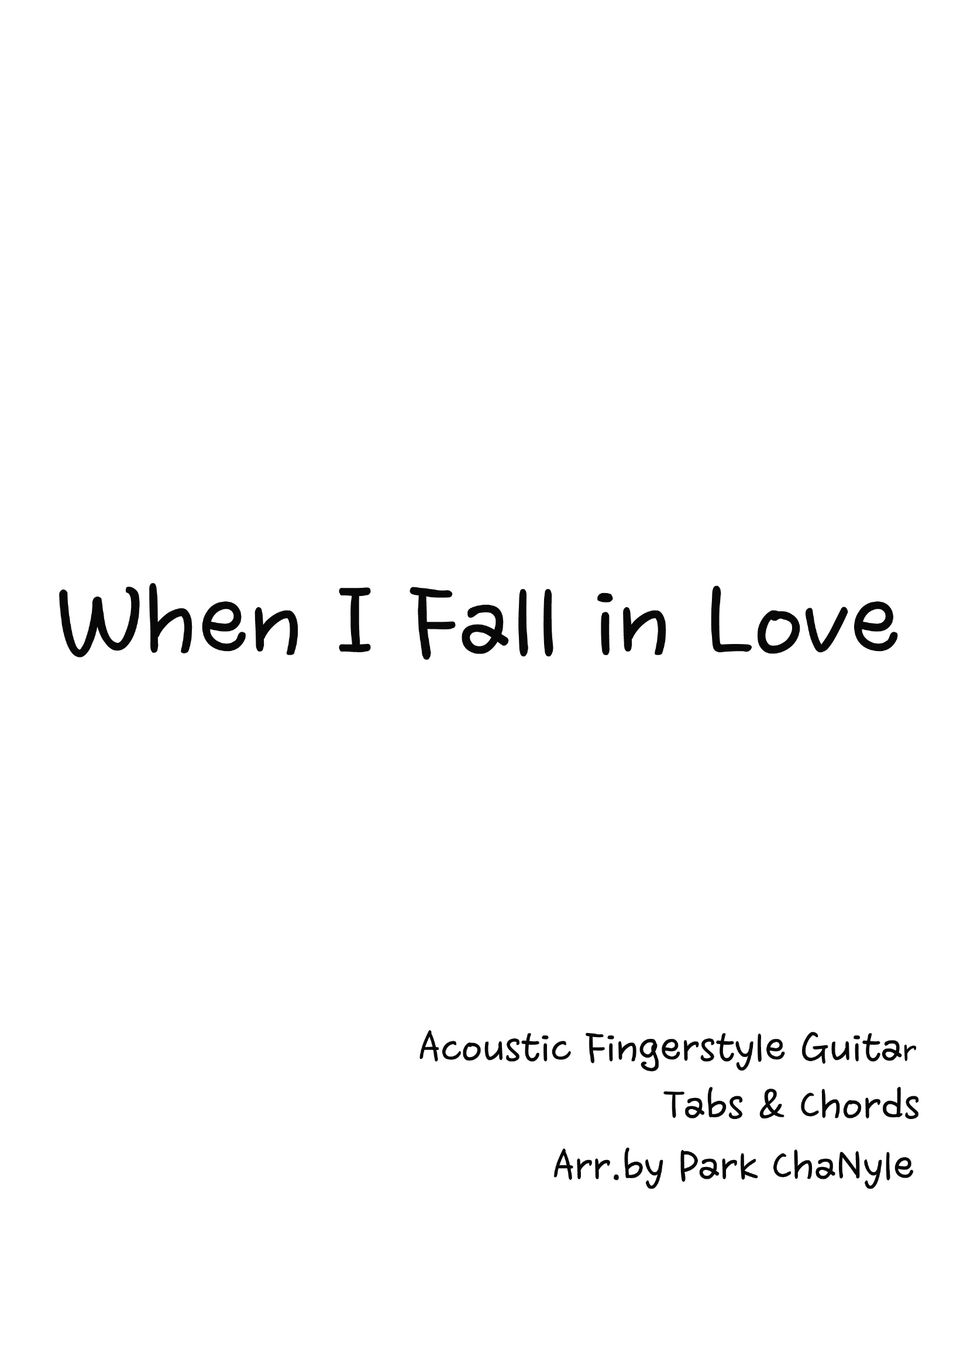 Victor Young - When I Fall in Love (Fingerstyle Guitar) by Park ChaNyle